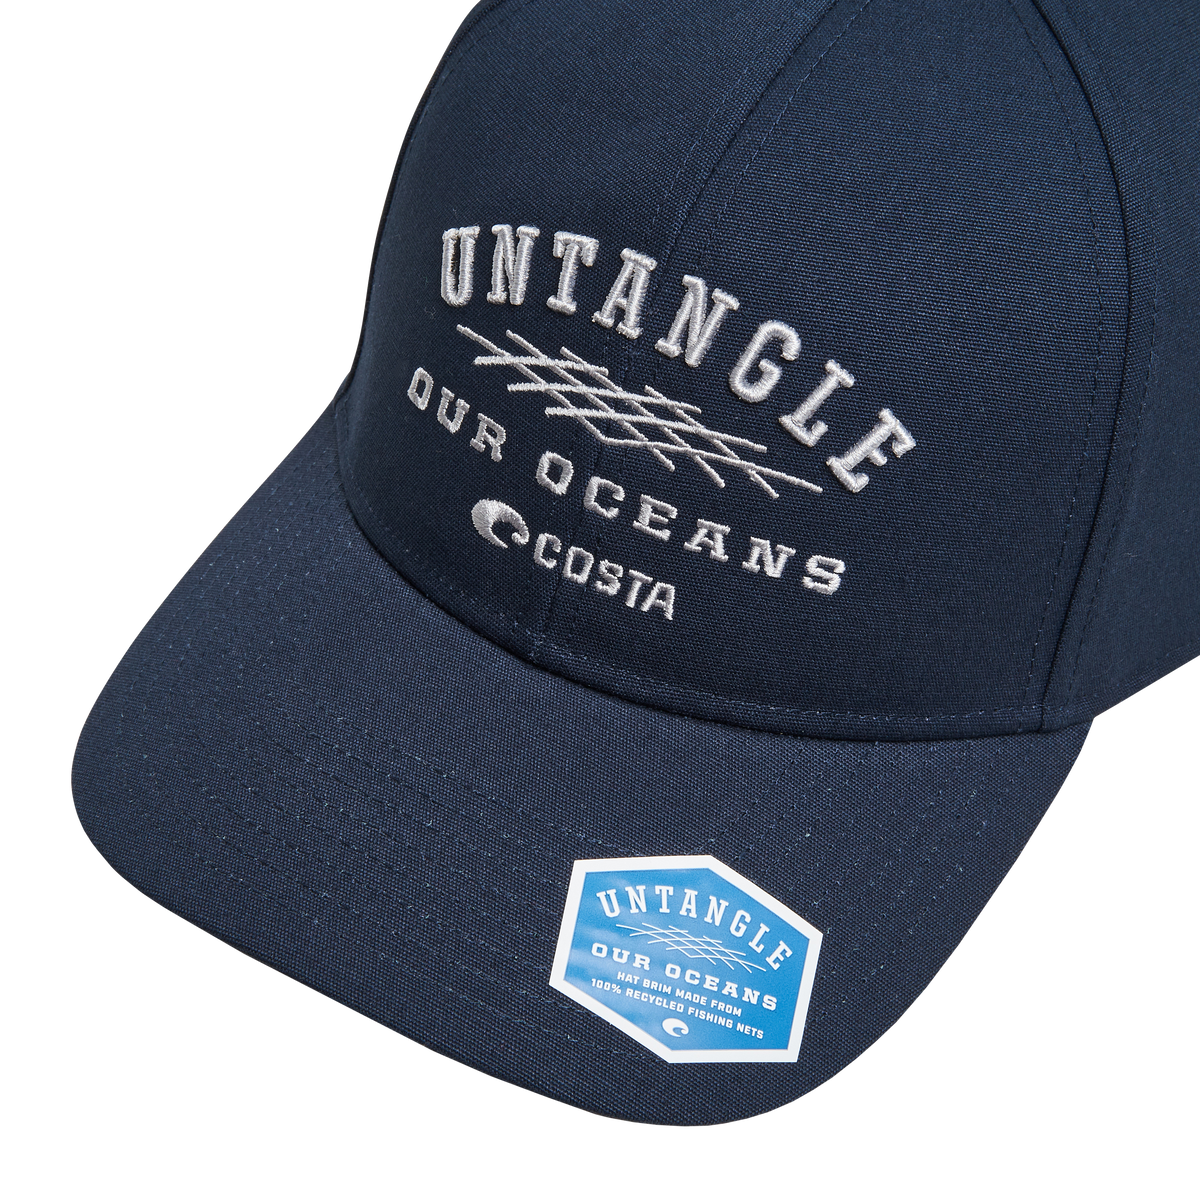 Costa Untangled Recycled Hat - Blue